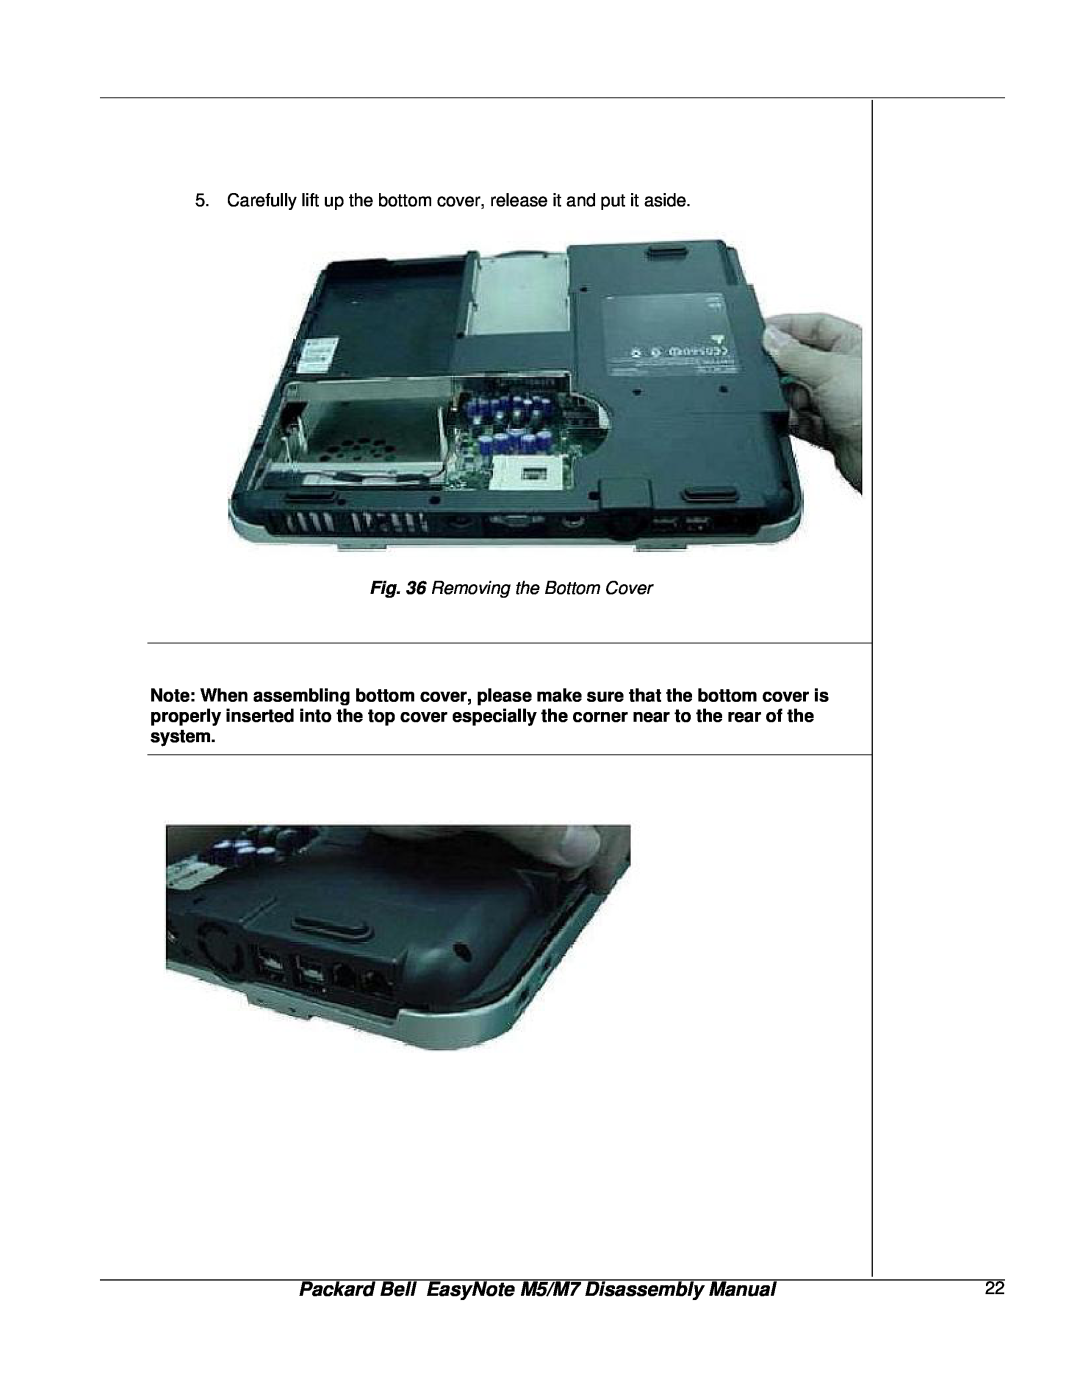 NEC manual Removing the Bottom Cover, Packard Bell EasyNote M5/M7 Disassembly Manual 